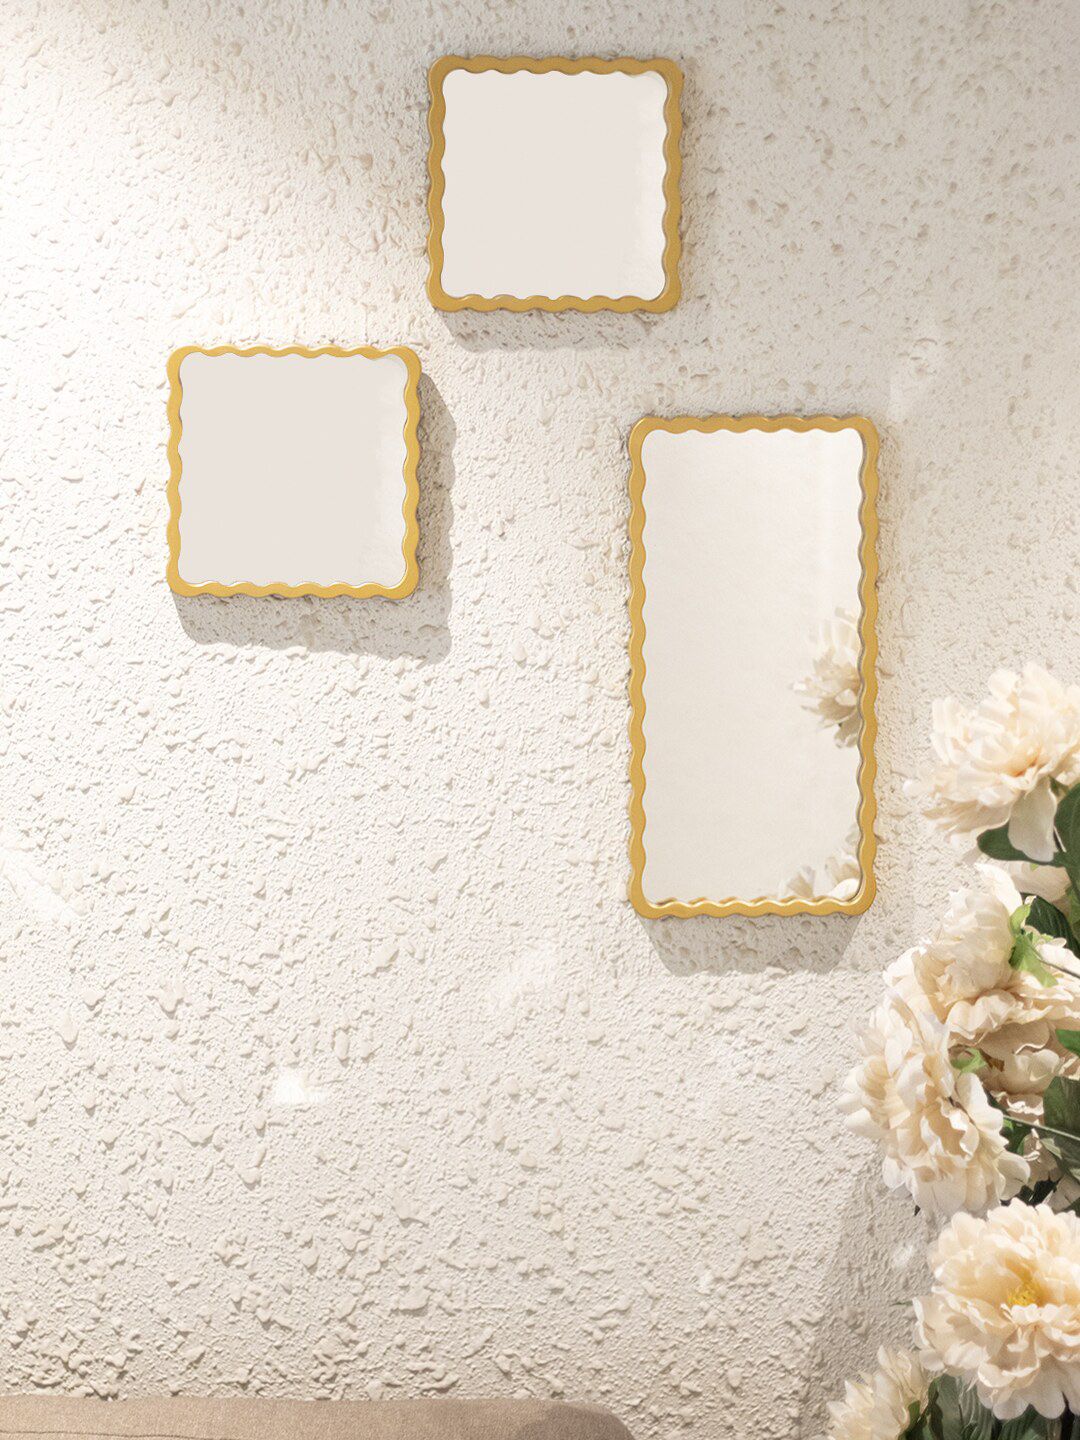 MARKET99 Set Of 3 Gold-Toned Mirrors Price in India